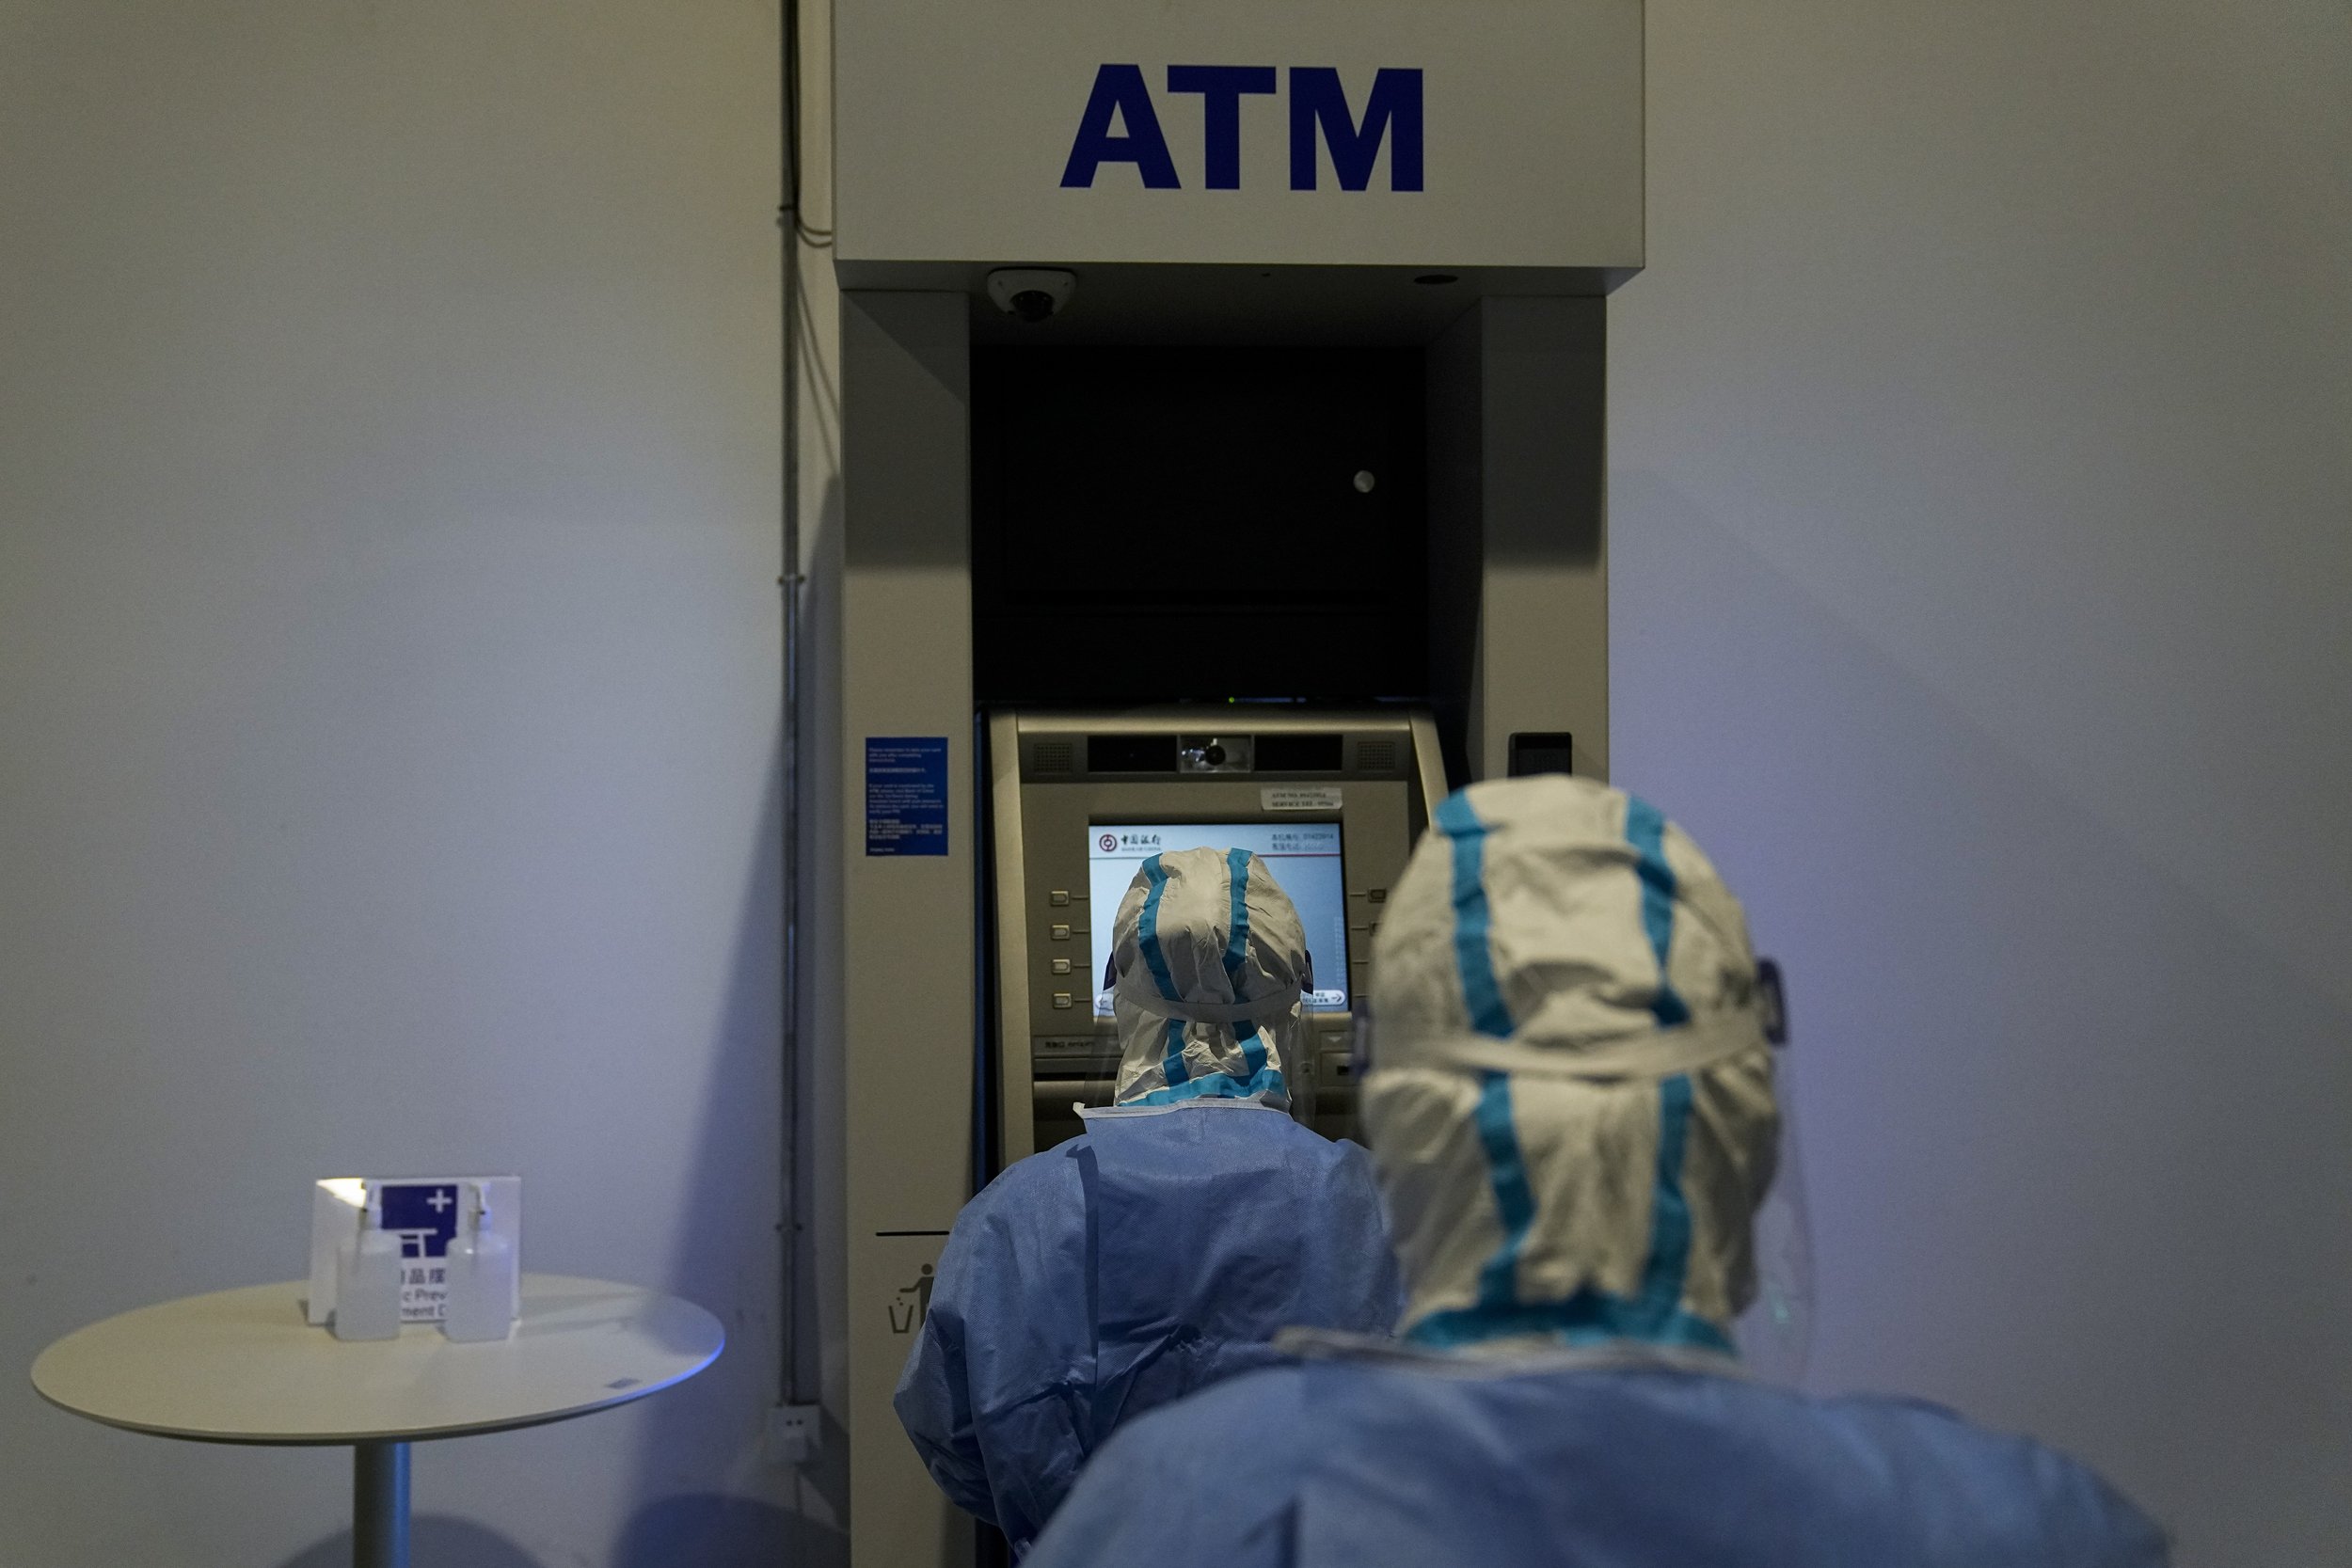  Two medical workers collect a sample from an ATM for COVID testing in the main media center at the 2022 Winter Olympics, Friday, Feb. 11, 2022, in Beijing. (AP Photo/Jae C. Hong) 